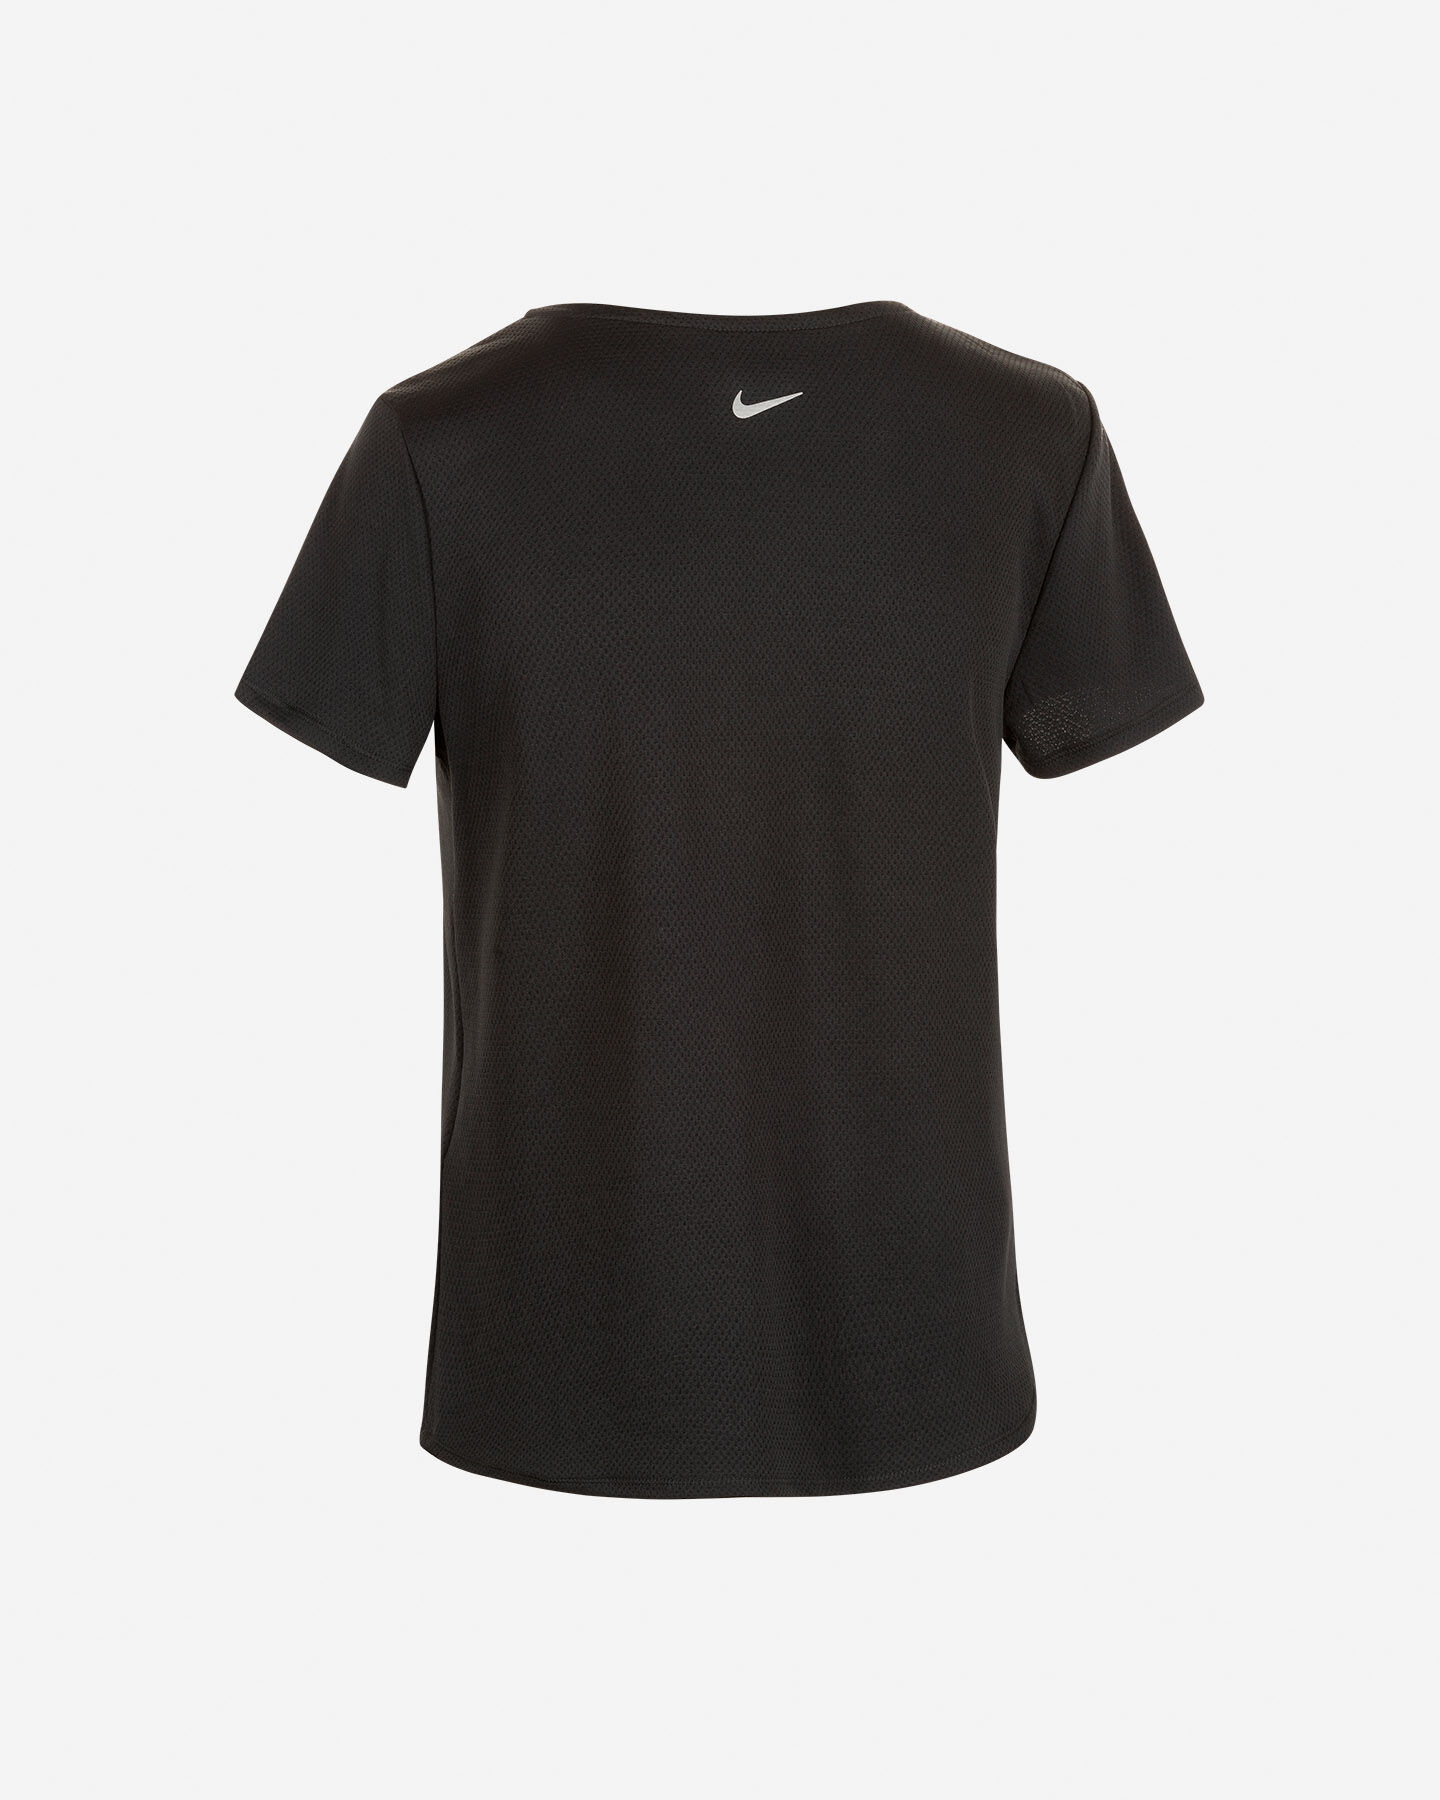  T-Shirt running NIKE ICON CLASH W S5371647|010|XS scatto 1